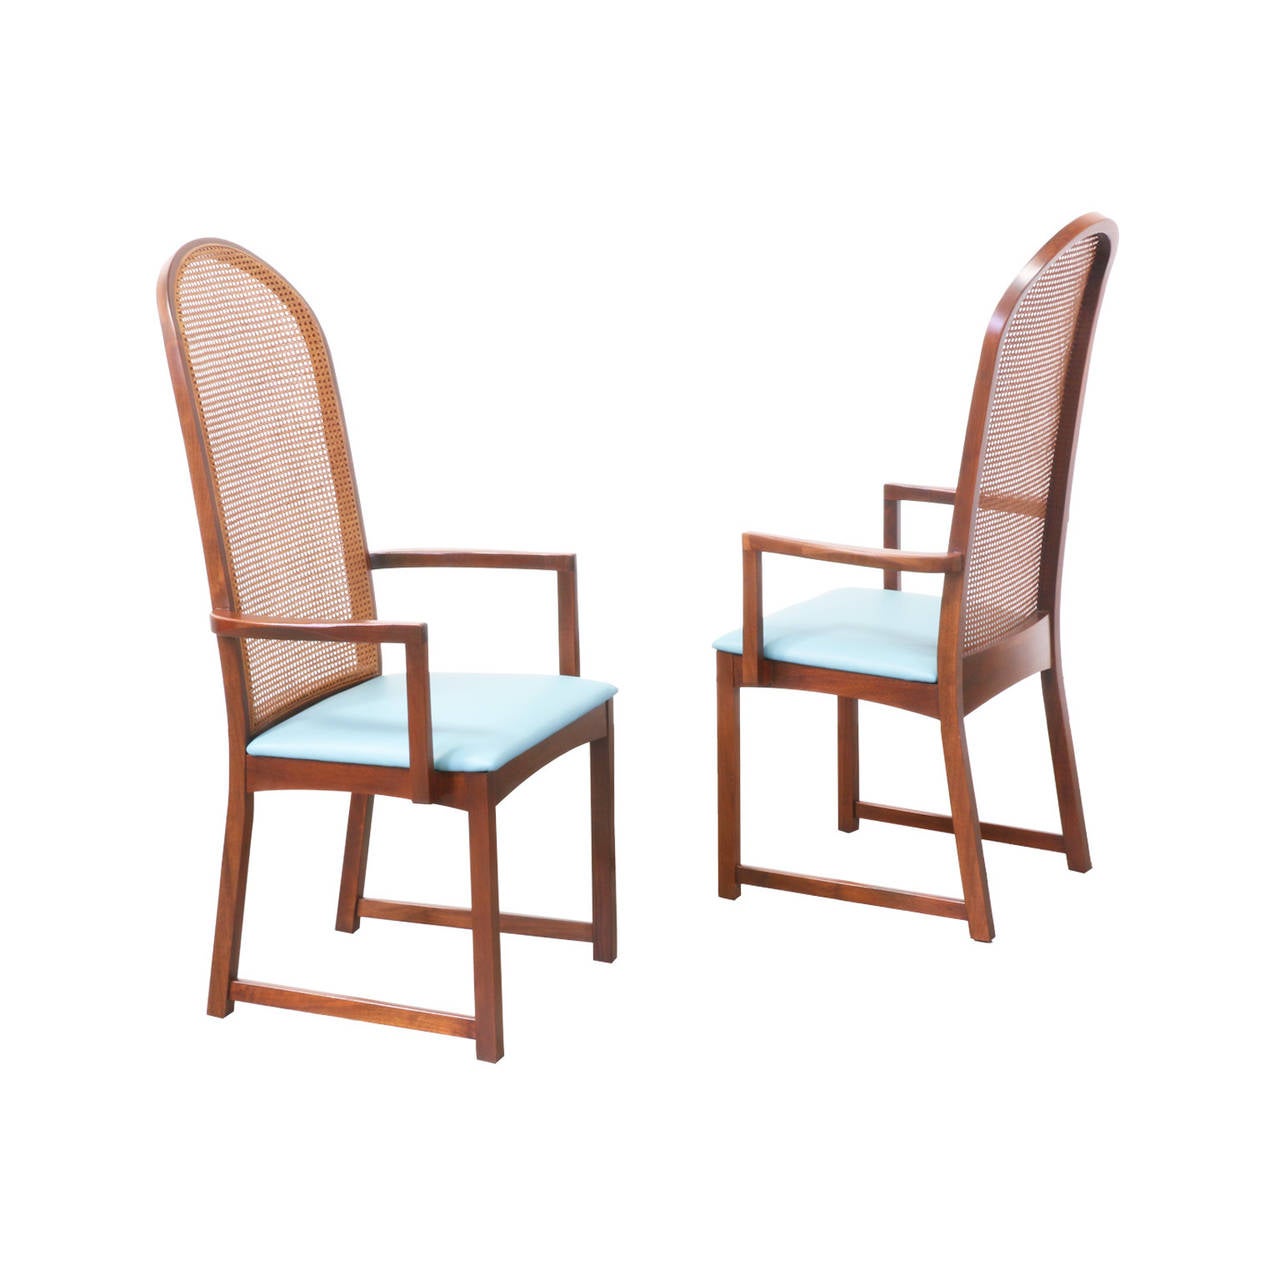 American Milo Baughman Dining Chairs with Cane Backrest for Thayer Coggin